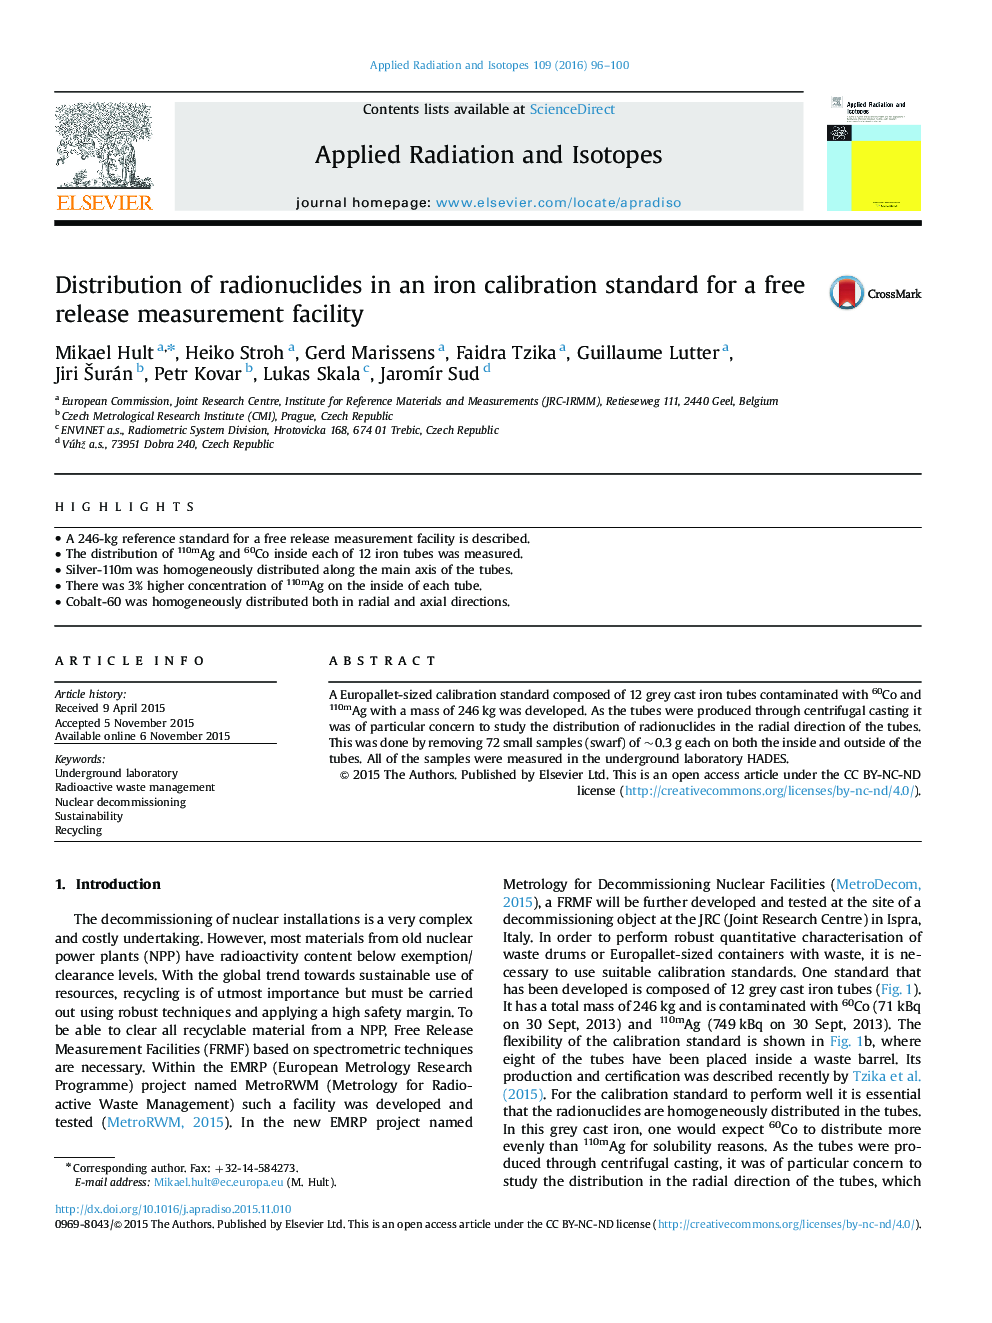 Distribution of radionuclides in an iron calibration standard for a free release measurement facility